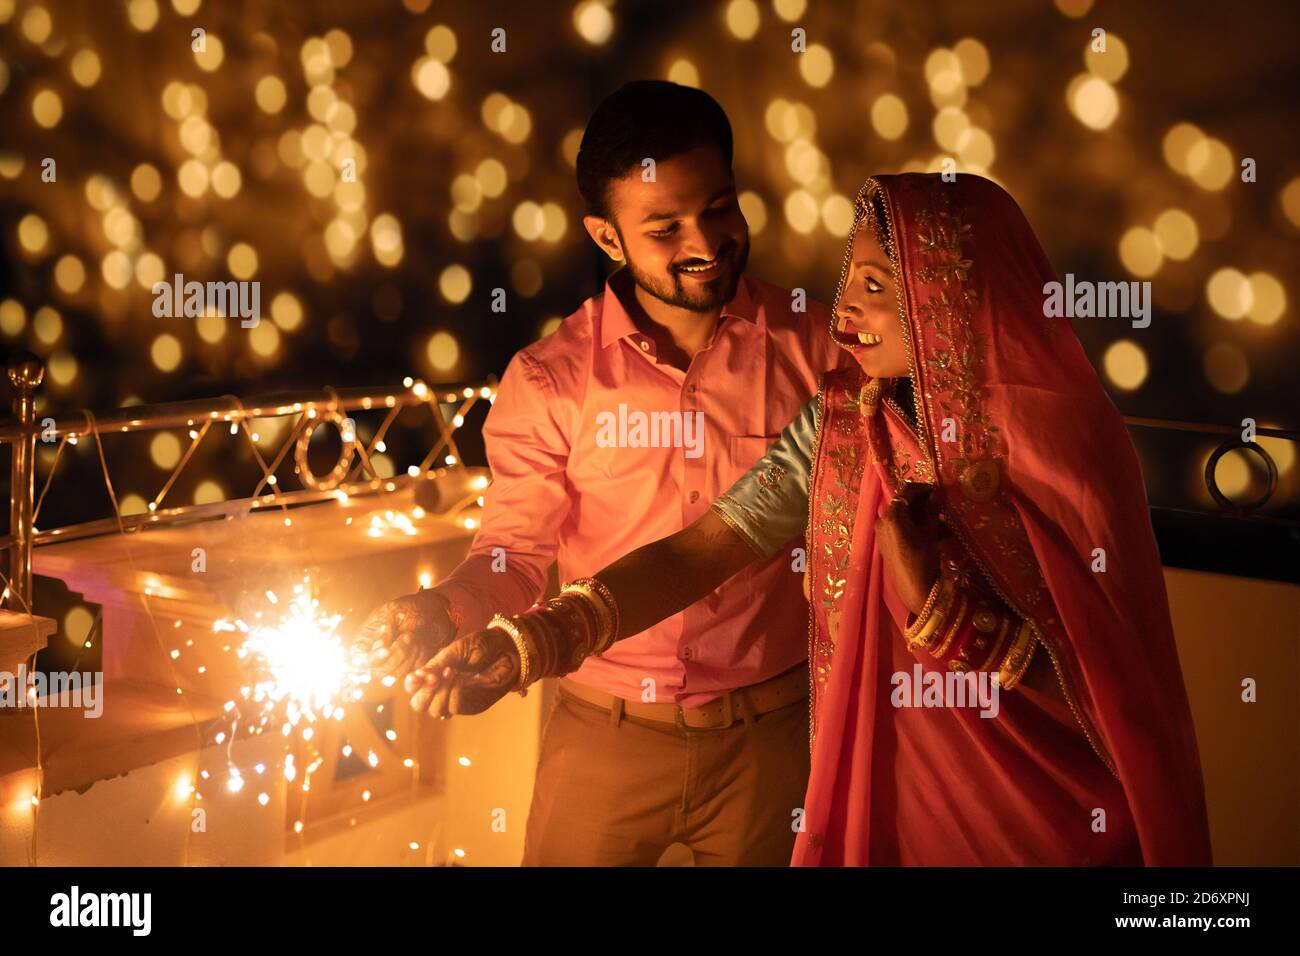 Diwali 2023: From WhatsApp Messages To Instagram Captions, Here Are The Best  Diwali Captions